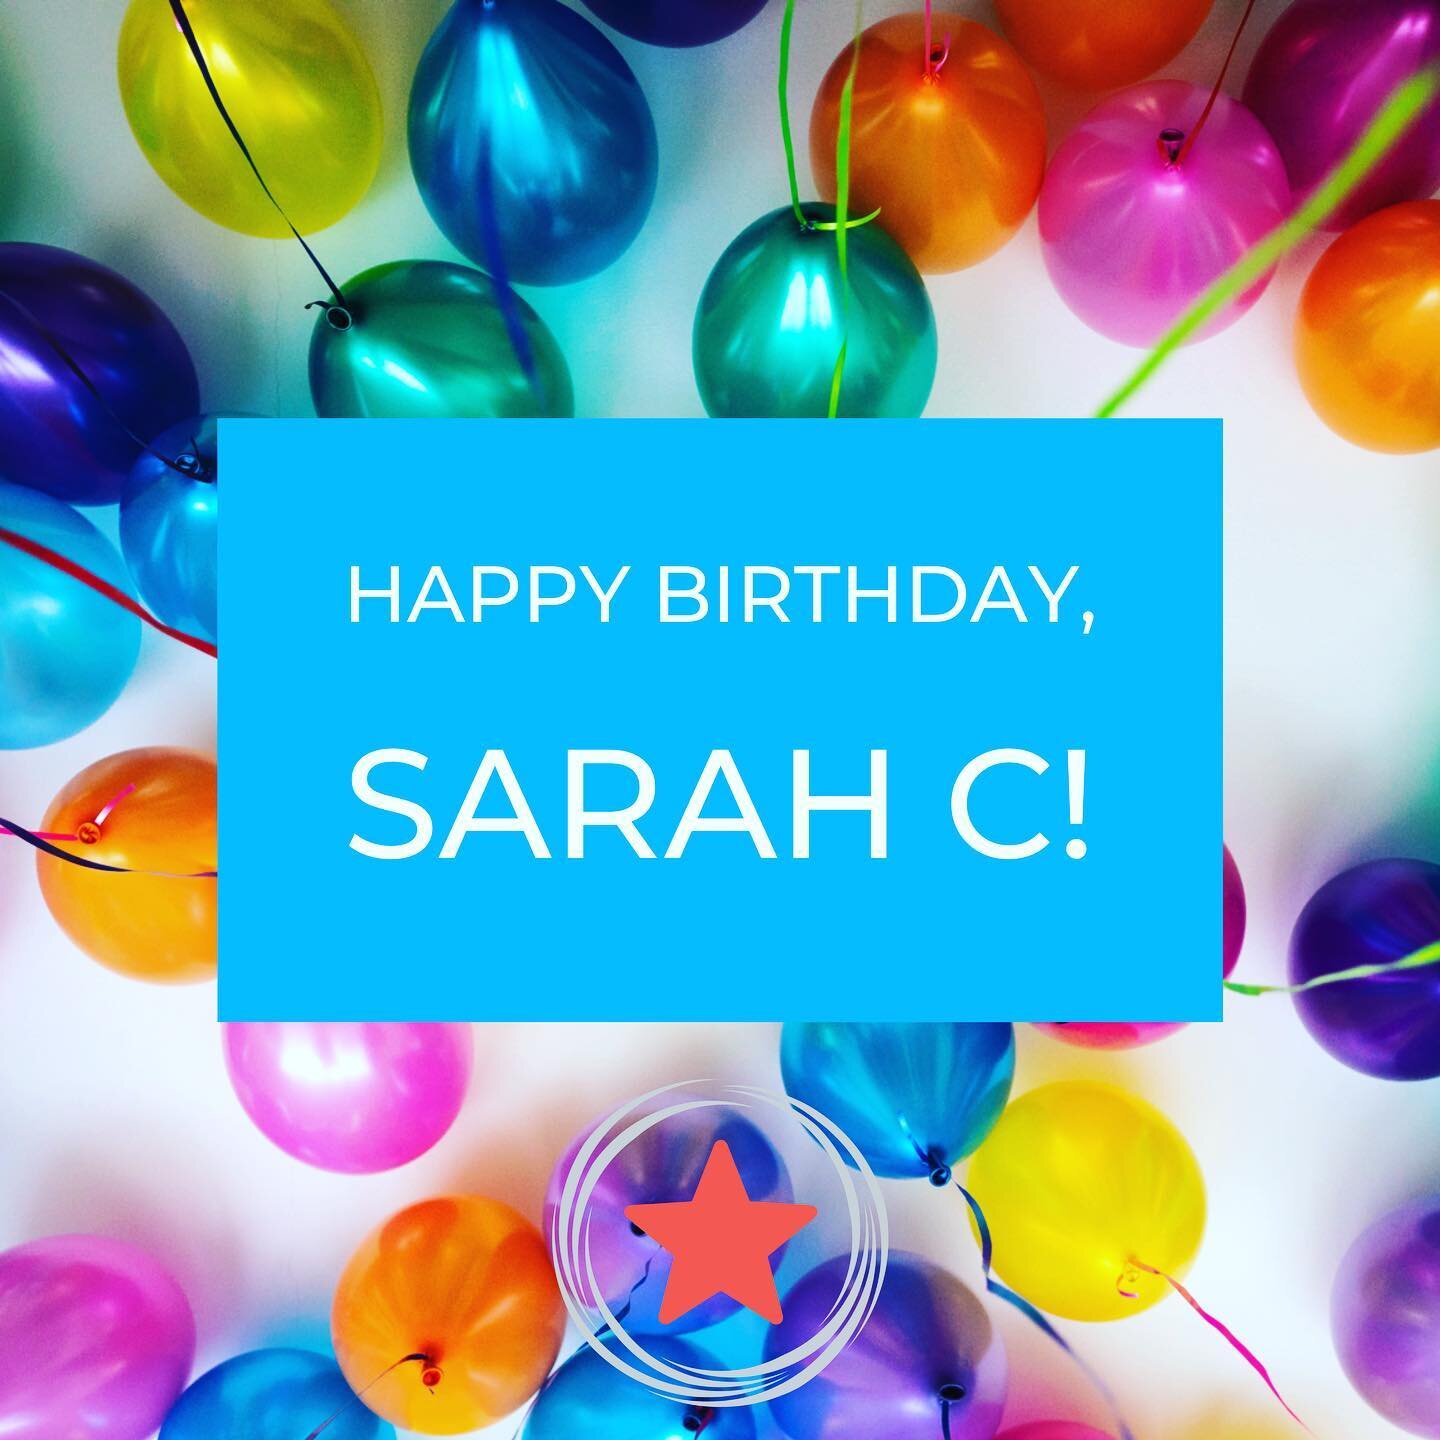 Help us wish CLUB Fit instructor, Sarah C, a happy birthday today! Check her (sweaty) class out on Sundays at 7:15am!